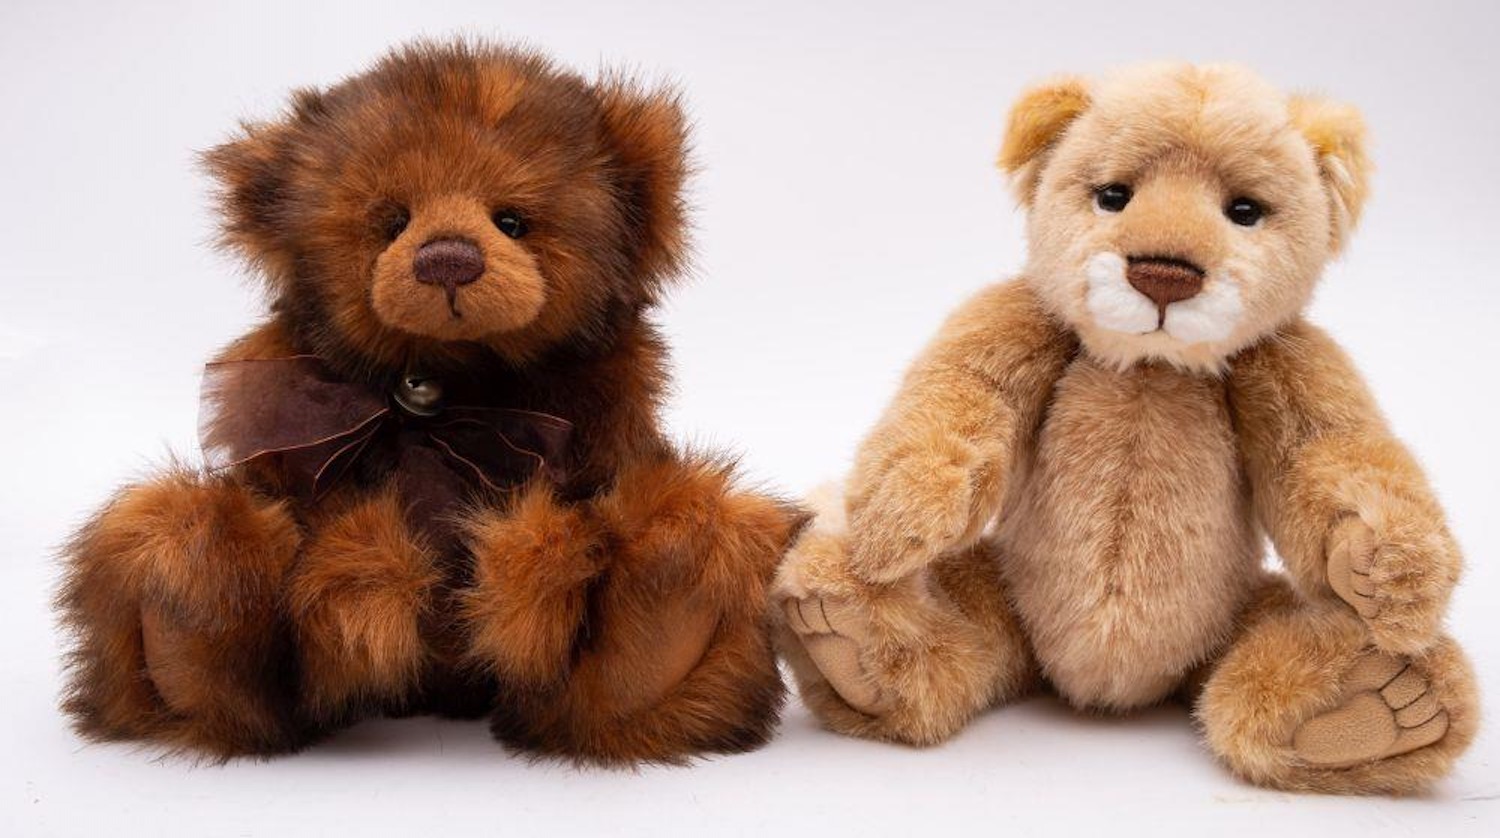 Two Charlie Bears after designs by Isabelle Lee, - Image 2 of 2